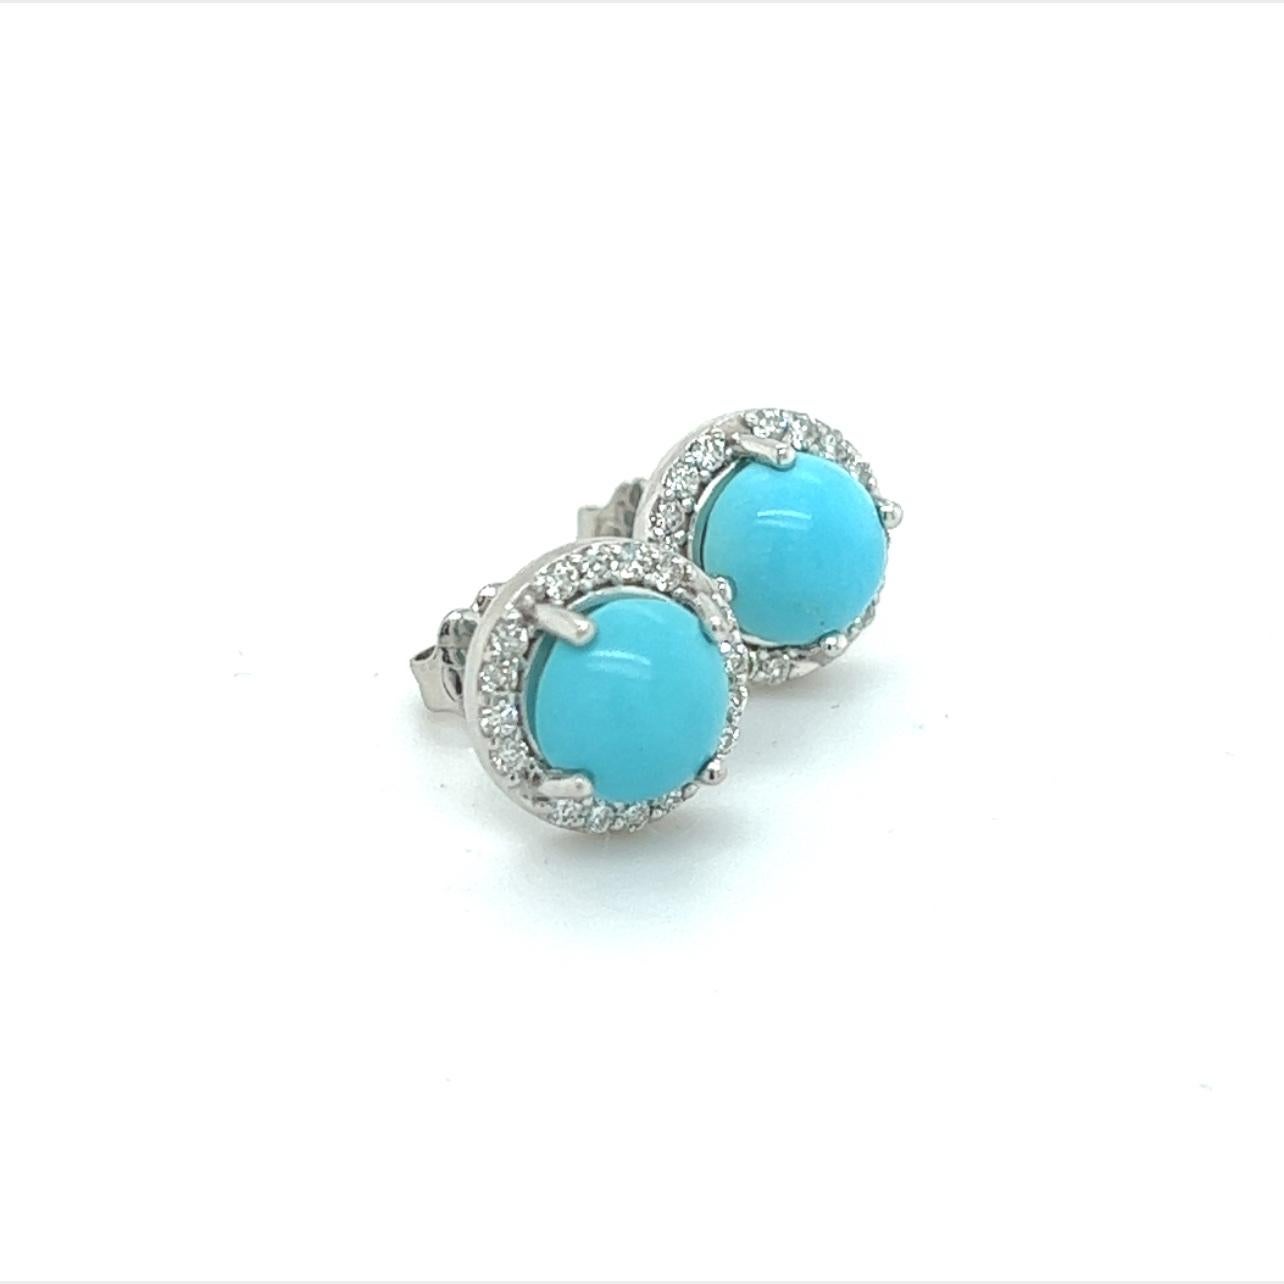 Women's Natural Turquoise Diamond Stud Earrings 14k White Gold 2.95 TCW Certified For Sale